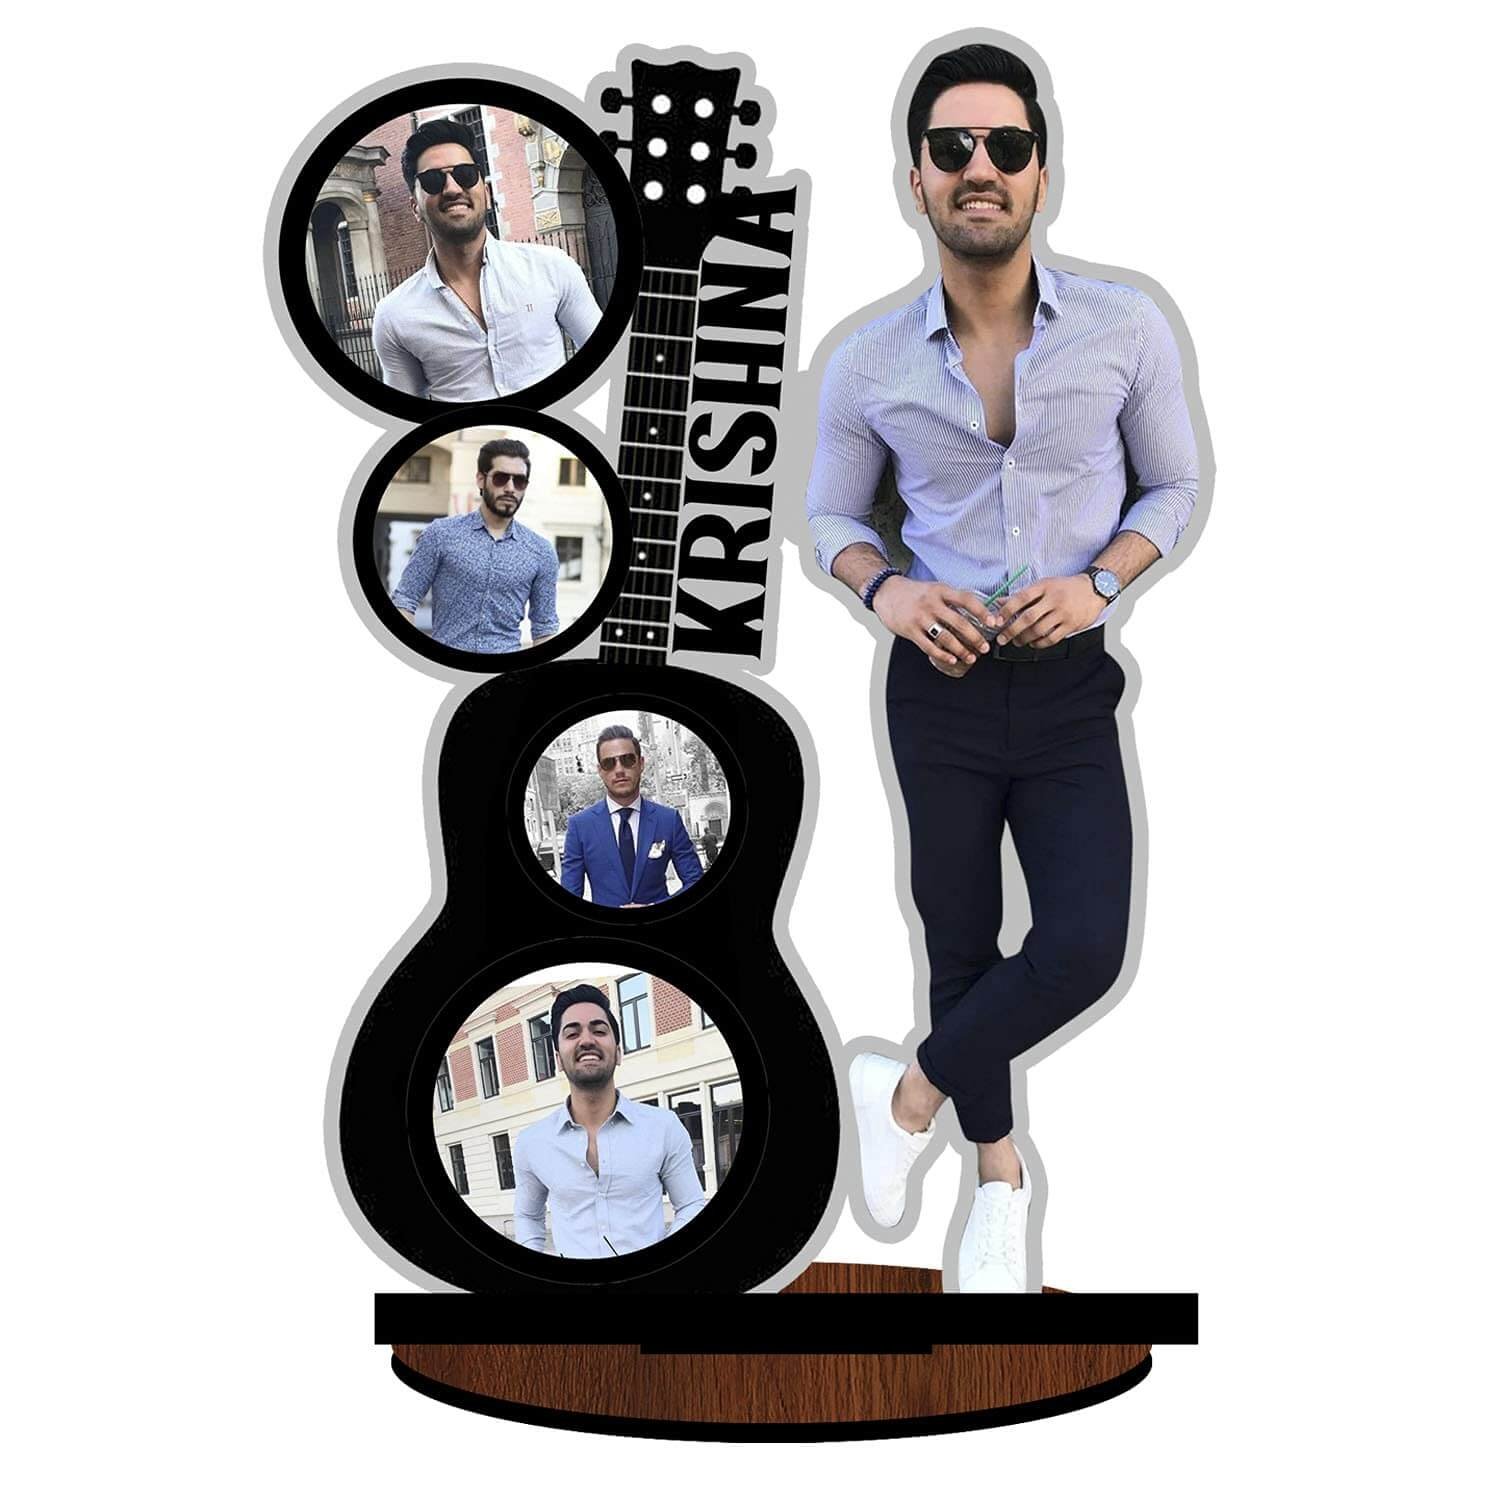 Guitar Photo Frame Standee Cutout Caricature MDF Wood Personalized Gift Customized with Your Photos & Name ( 9 x 12 inch )